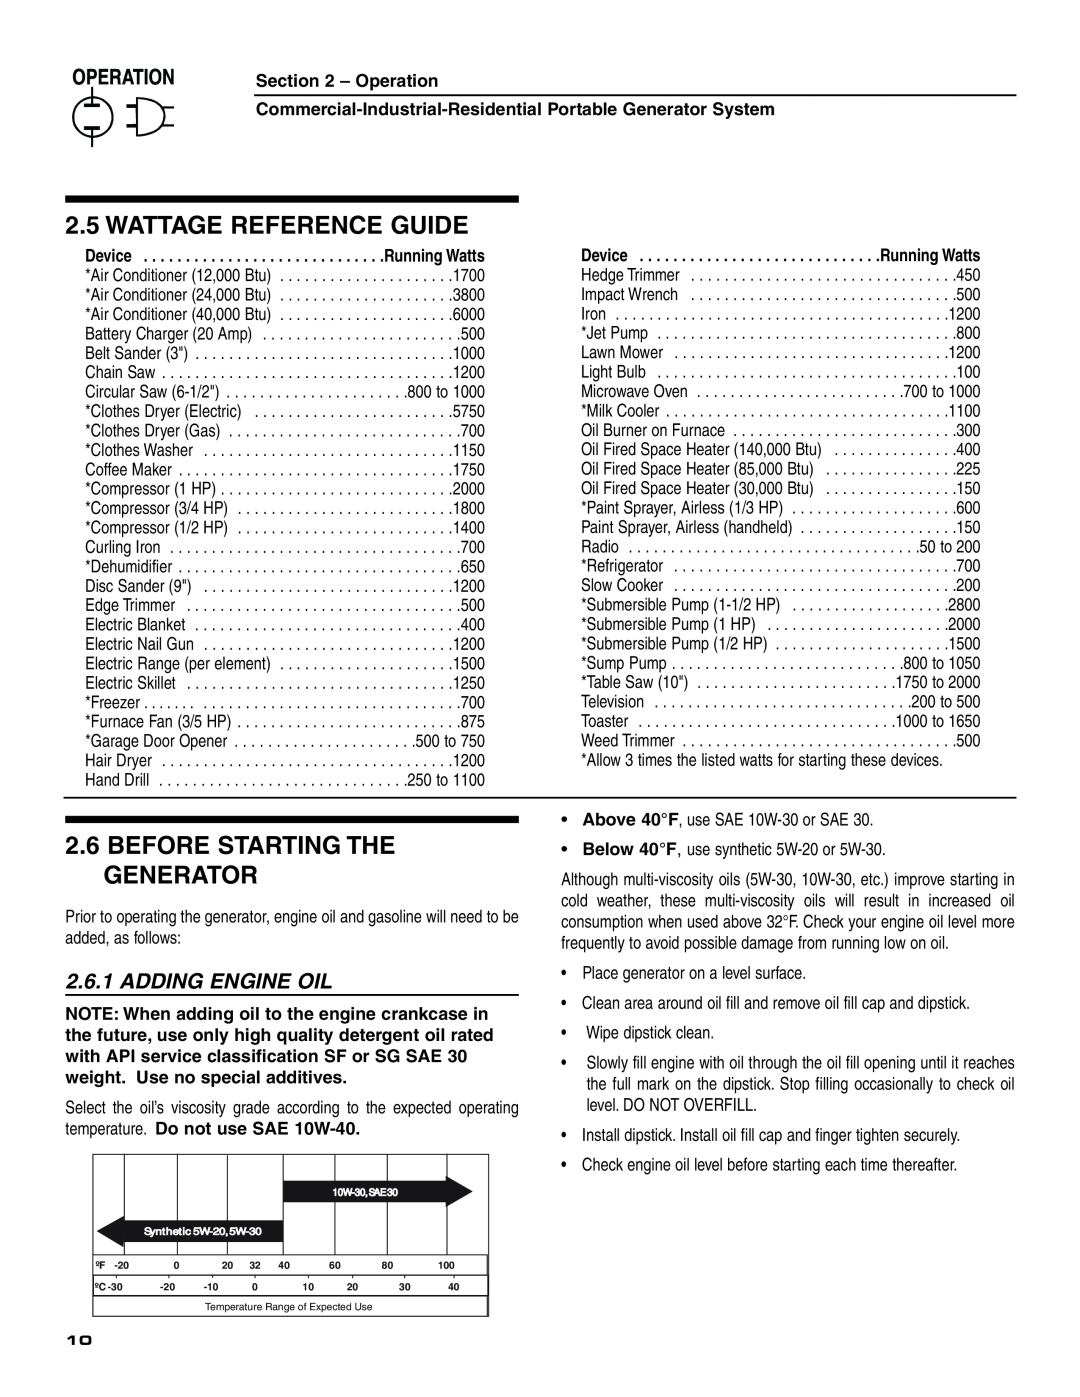 Generac 004451 ,004582 owner manual Wattage Reference Guide, Before Starting The Generator, Adding Engine Oil, Operation 